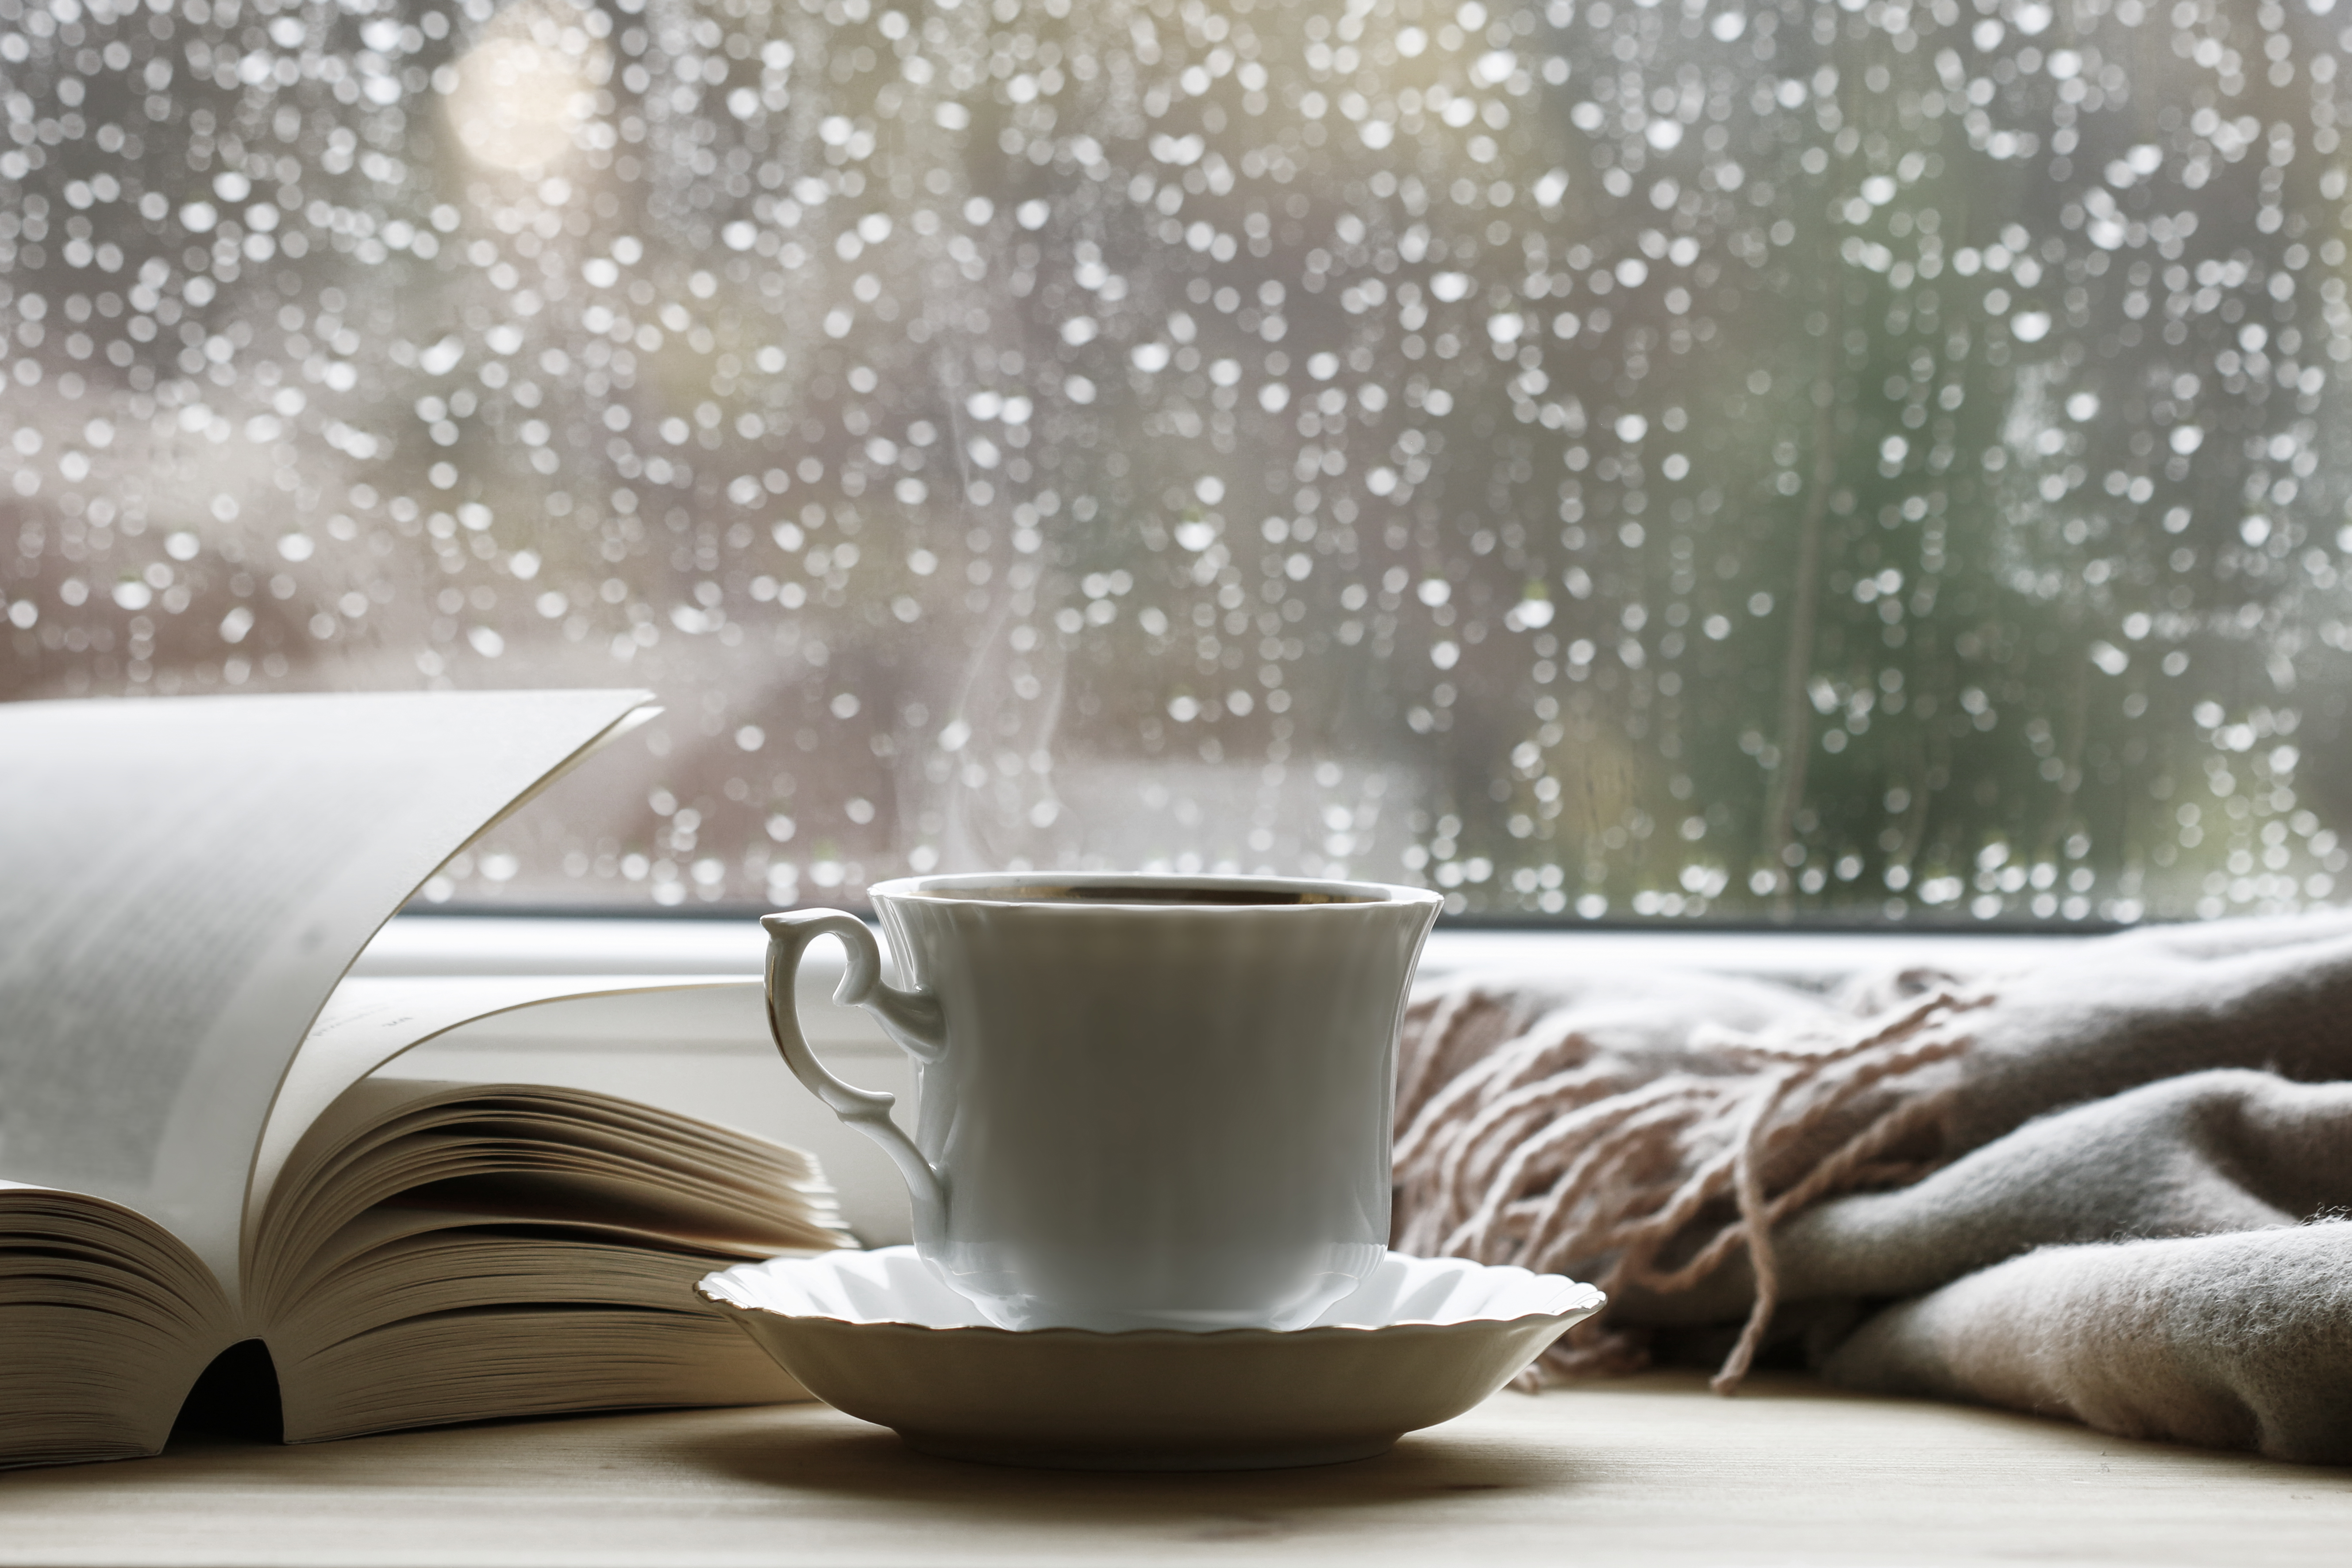 A book and teacup in front of a rainy window